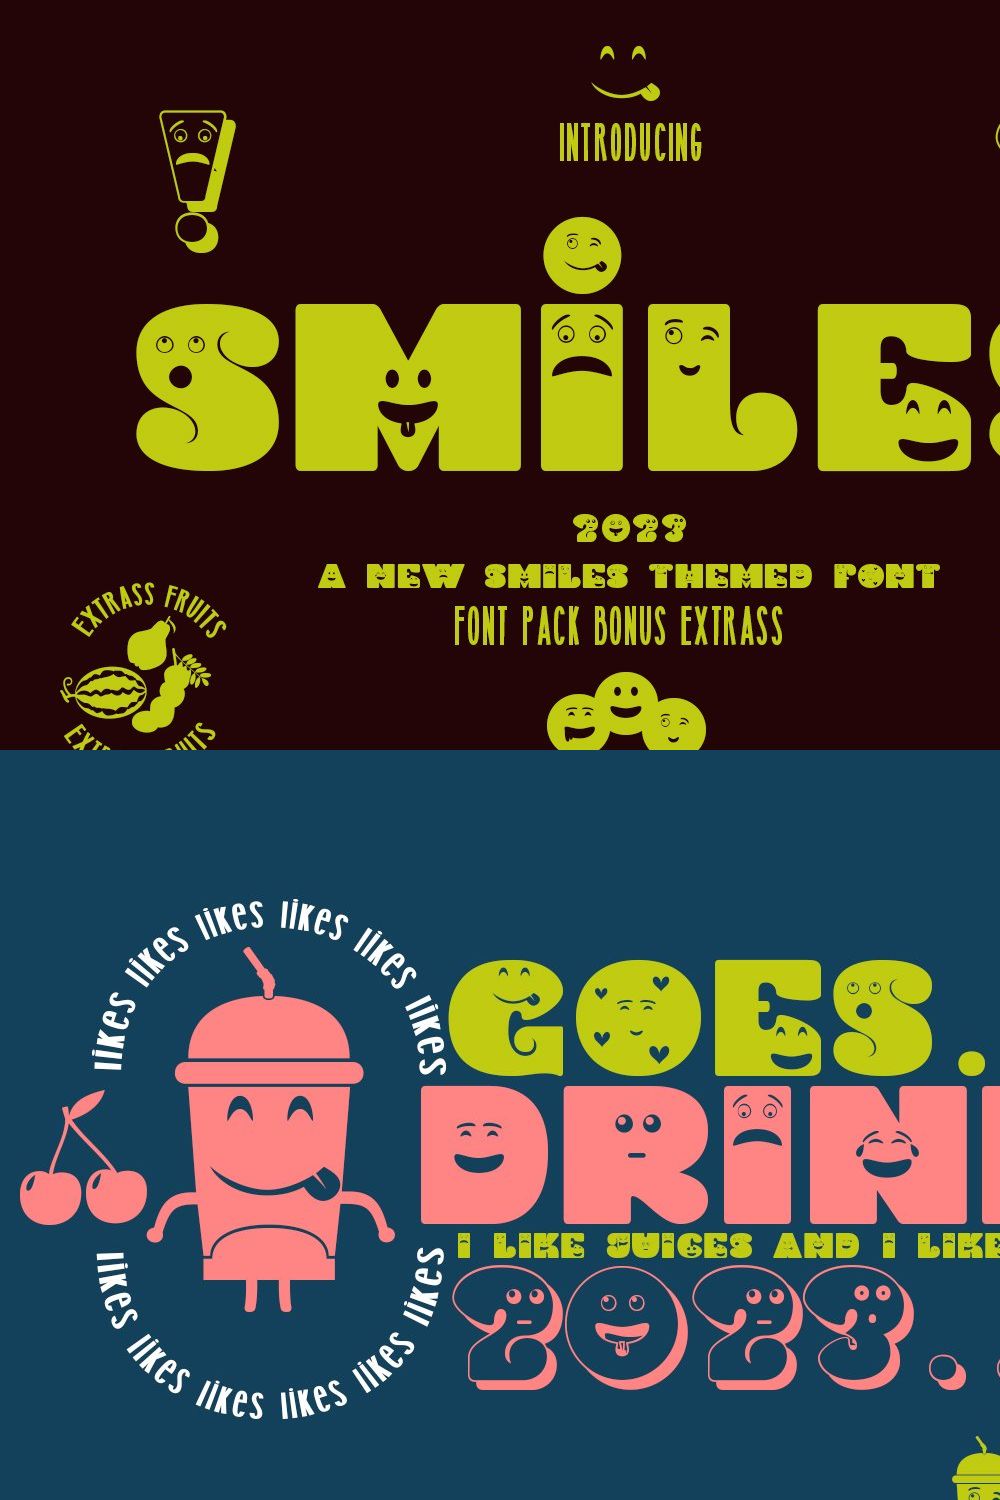 Smiles font family pinterest preview image.